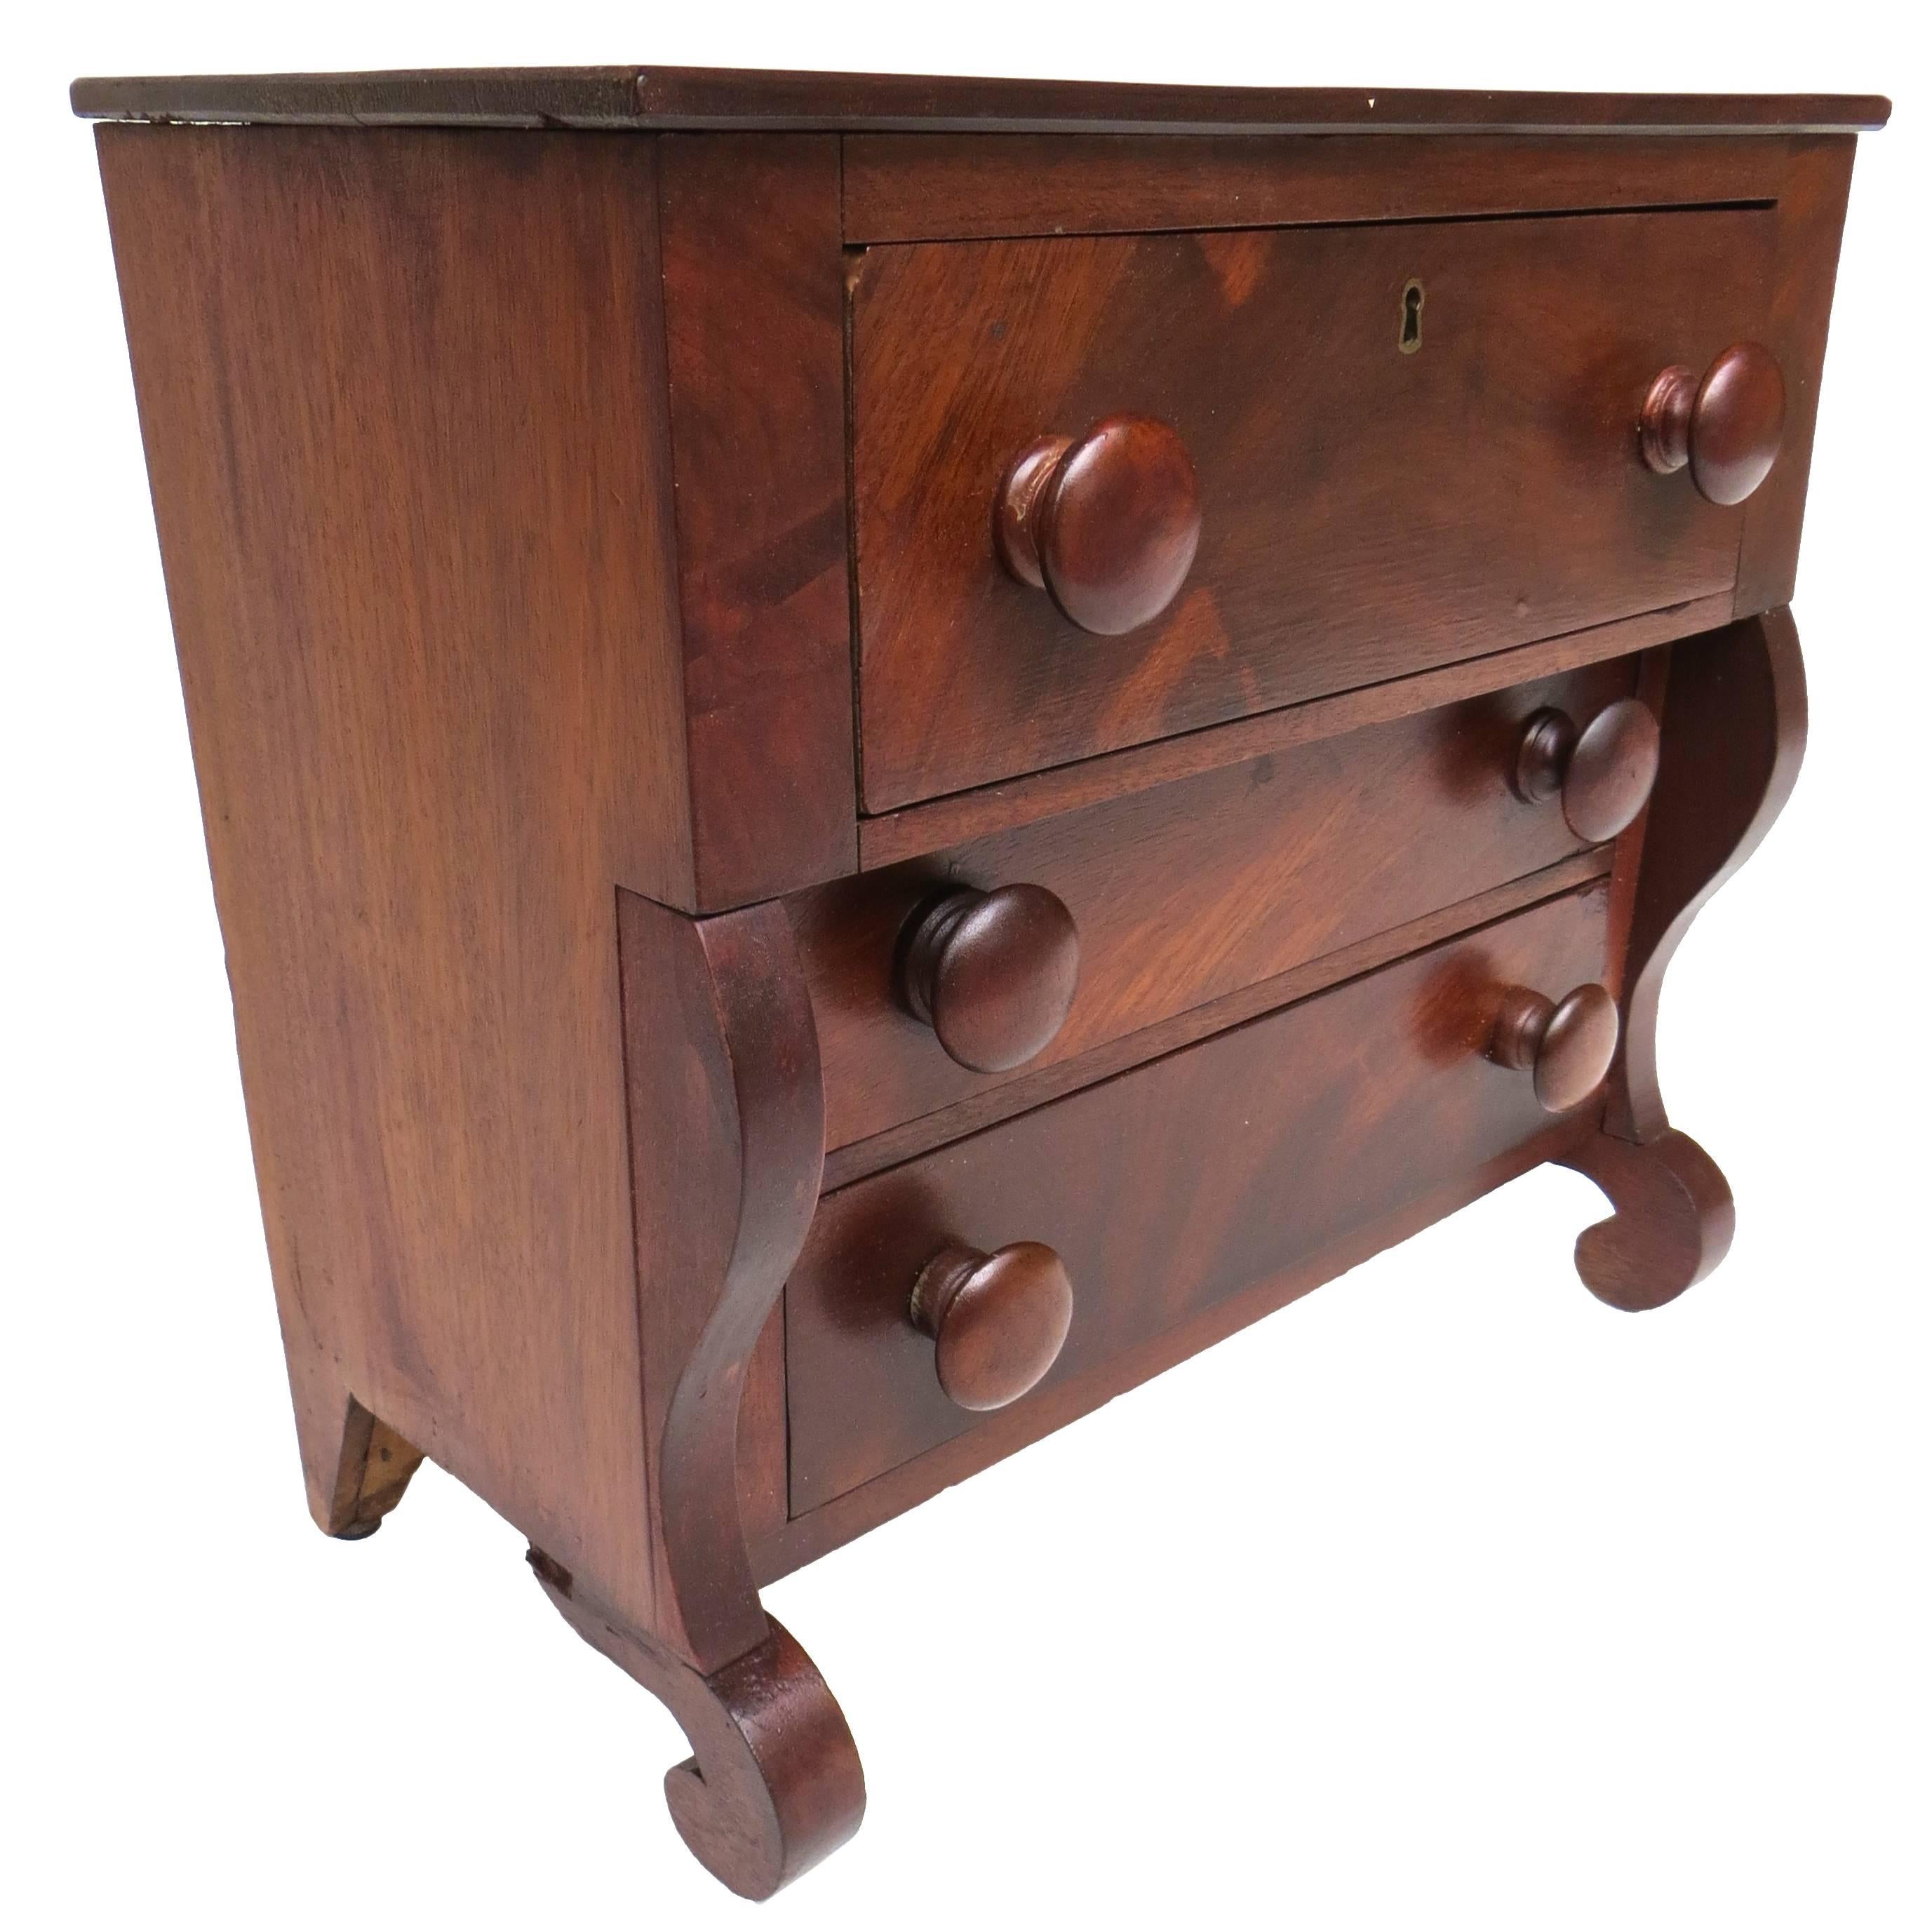 19th Century American Empire Miniature Chest (possibly Thomas Day)